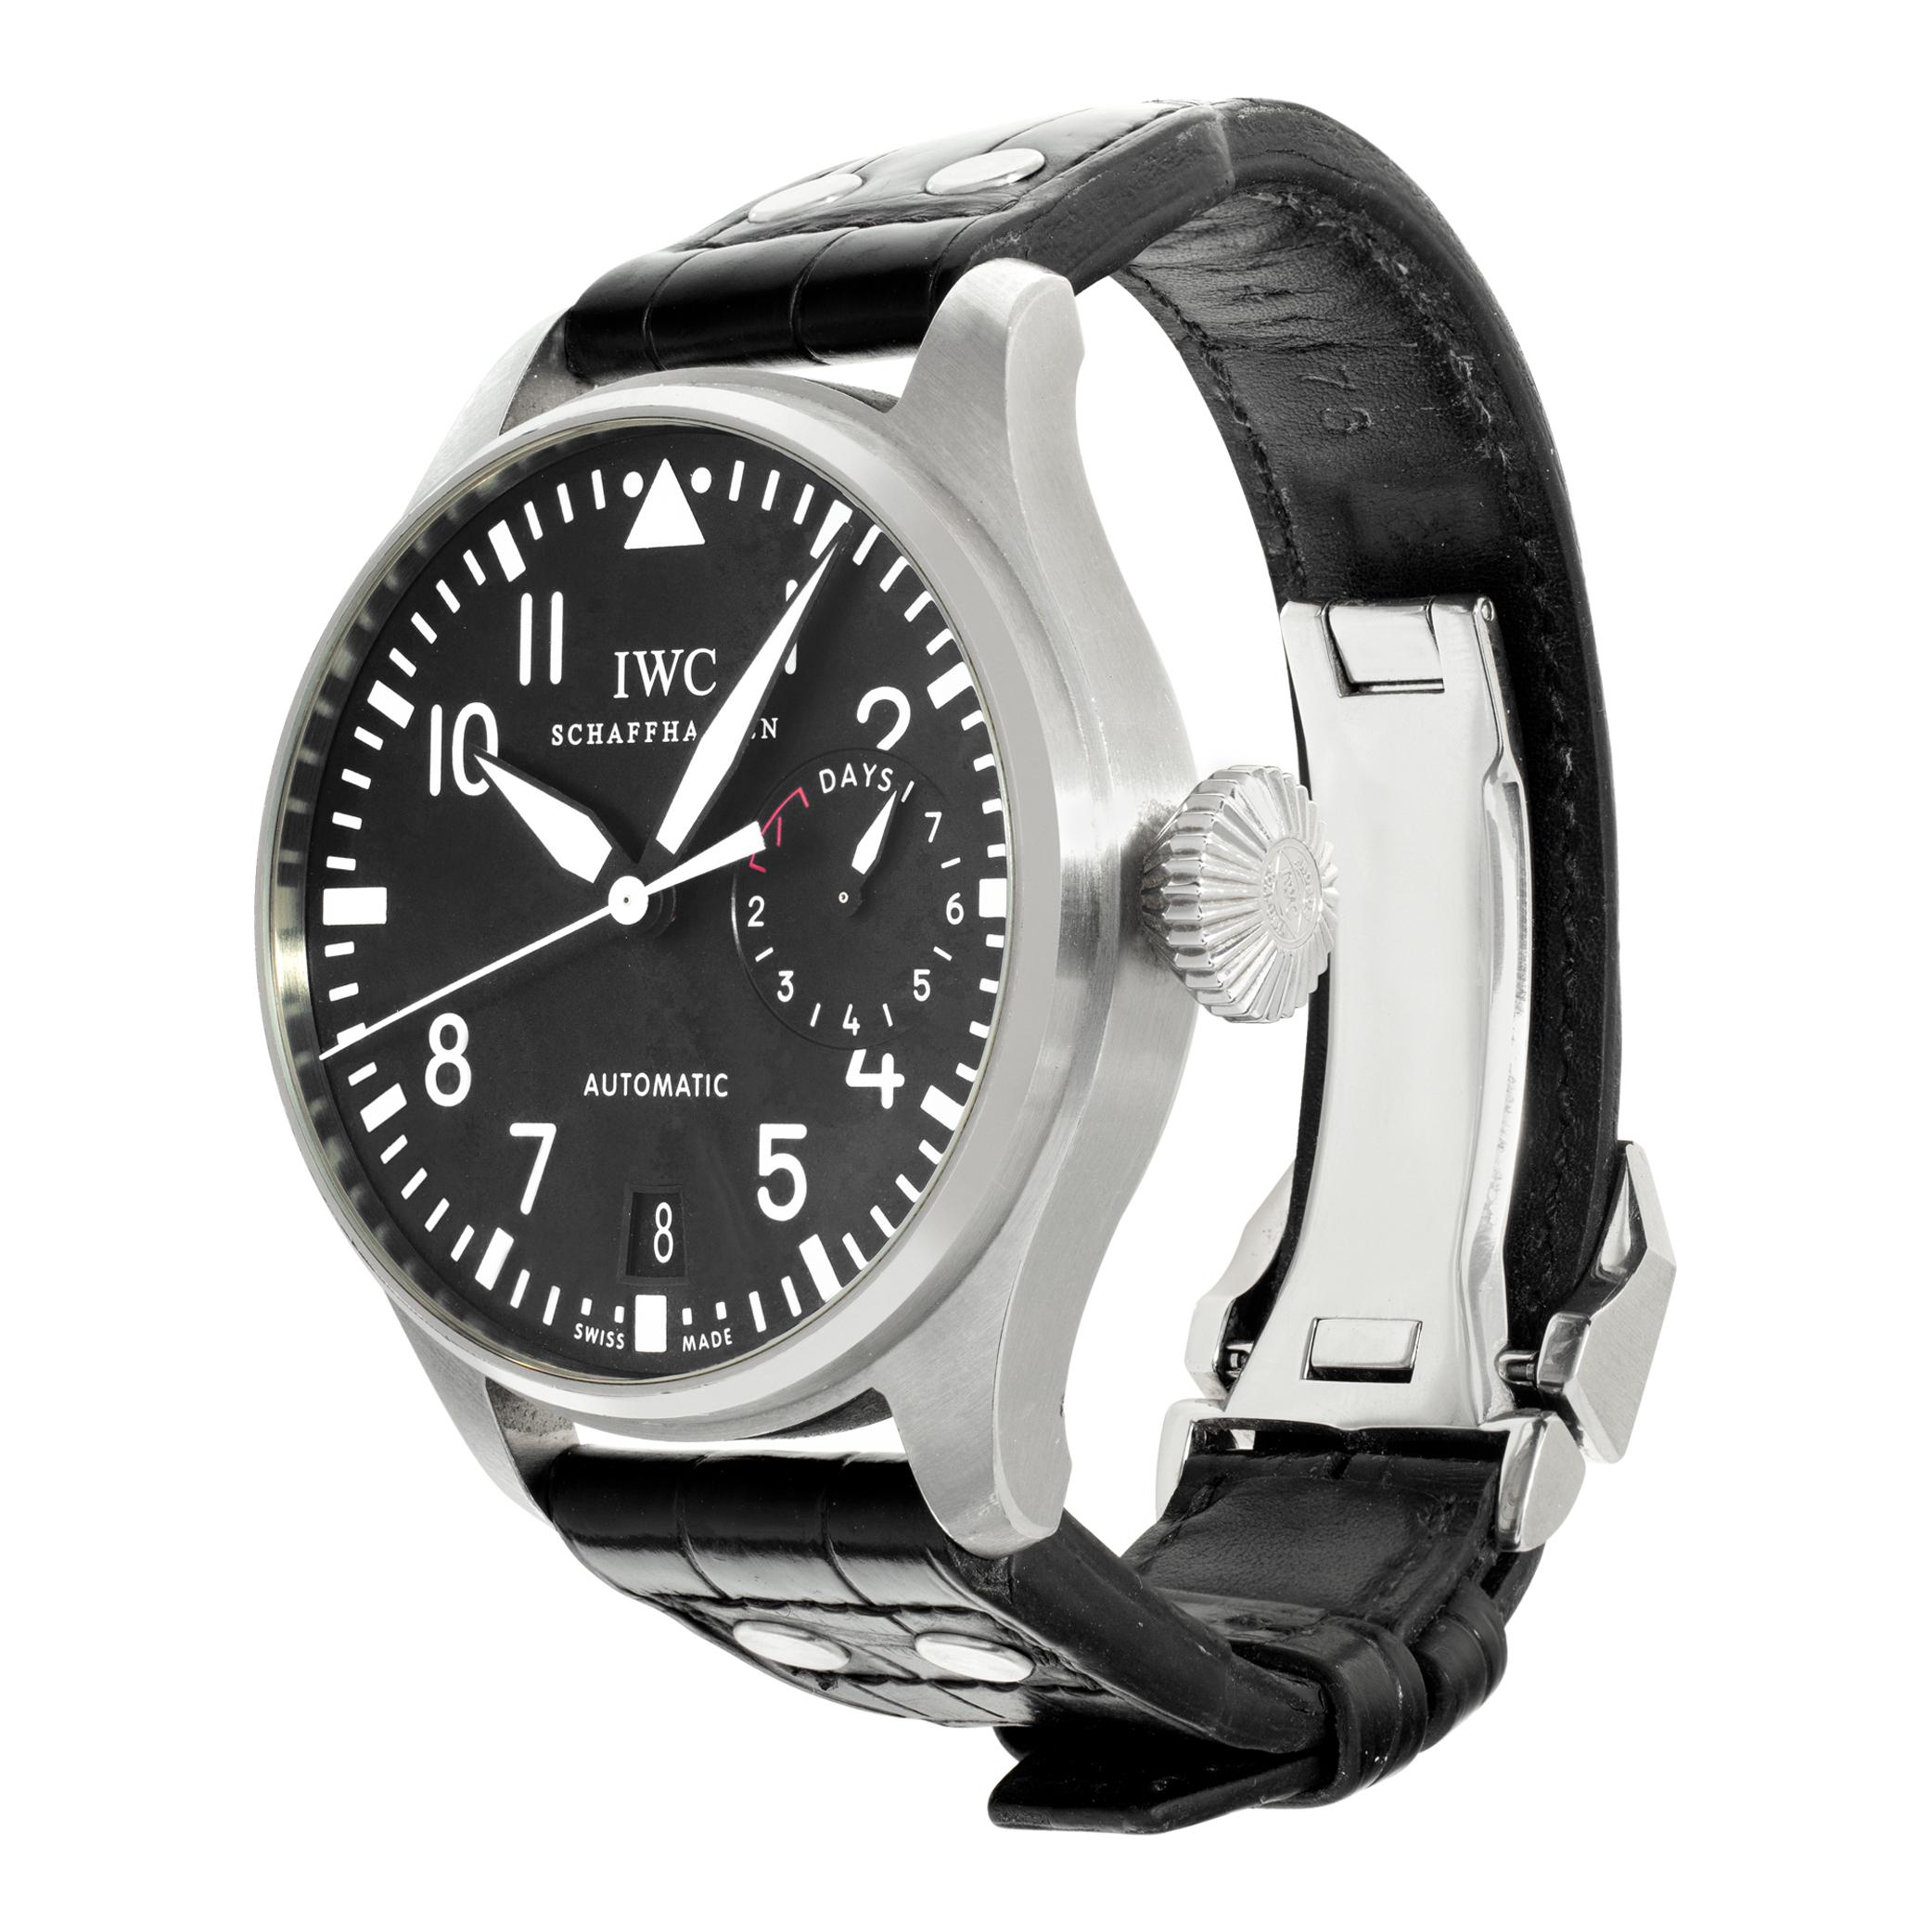 IWC Big Pilot Seven Days Power Reserve stainless steel on alligator band with IWC deployant buckle.. Auto w/ sweep seconds, date and power reserve. 46 mm case size. Ref 5004. With booklets. Fine Pre-owned IWC Watch.

 Certified preowned Sport IWC